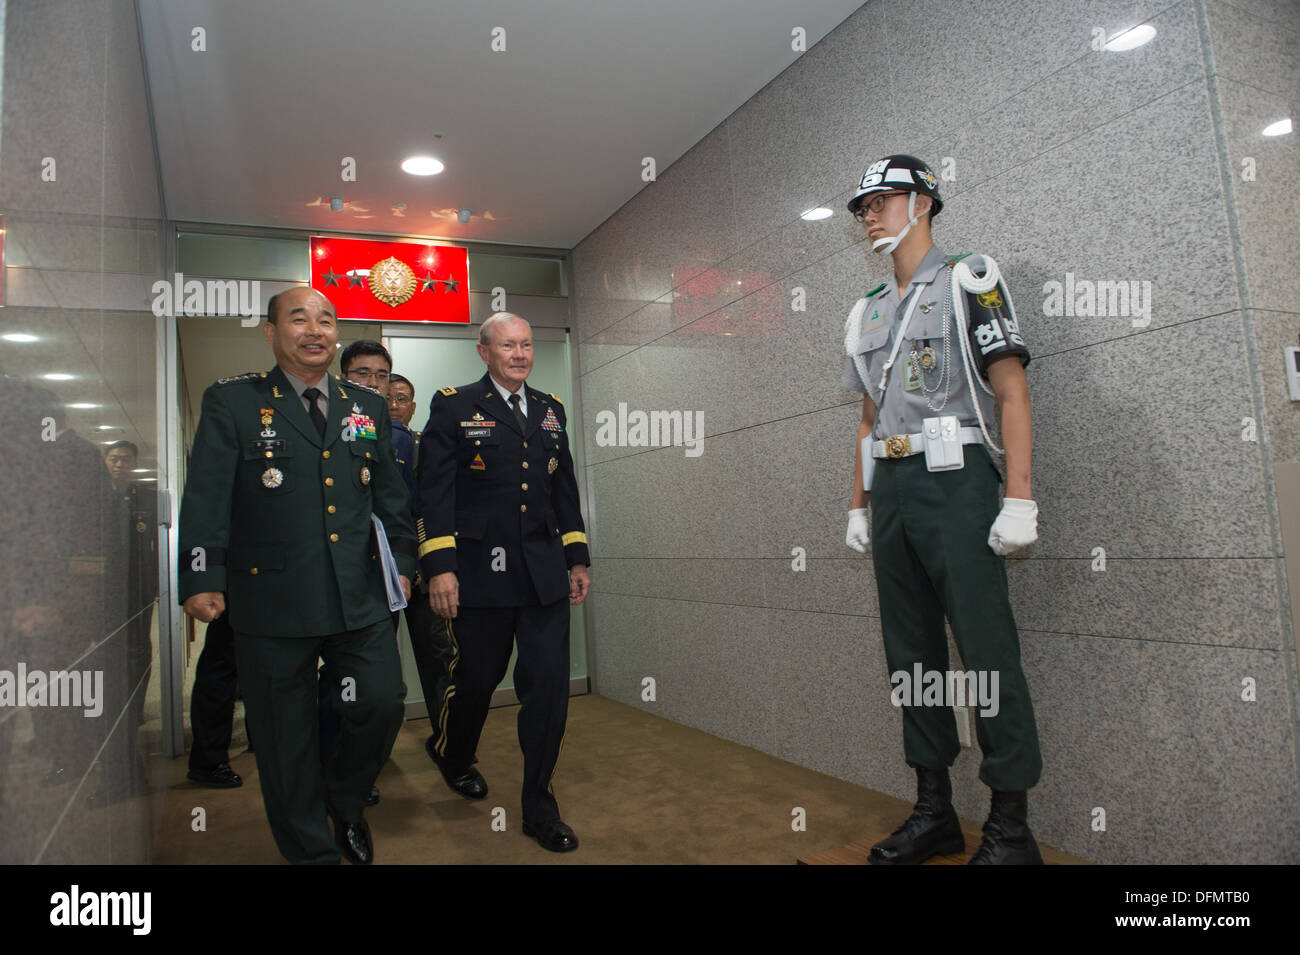 Chairman of the Joint Chiefs of Staff Gen. Martin E. Dempsey is walks with his South Korean counterpart Gen. Jung Seung Jo during an office call in Seoul, South Korea Sept. 30, 2013. Dempsey is on a four-day trip to South Korea highlighting the strong all Stock Photo